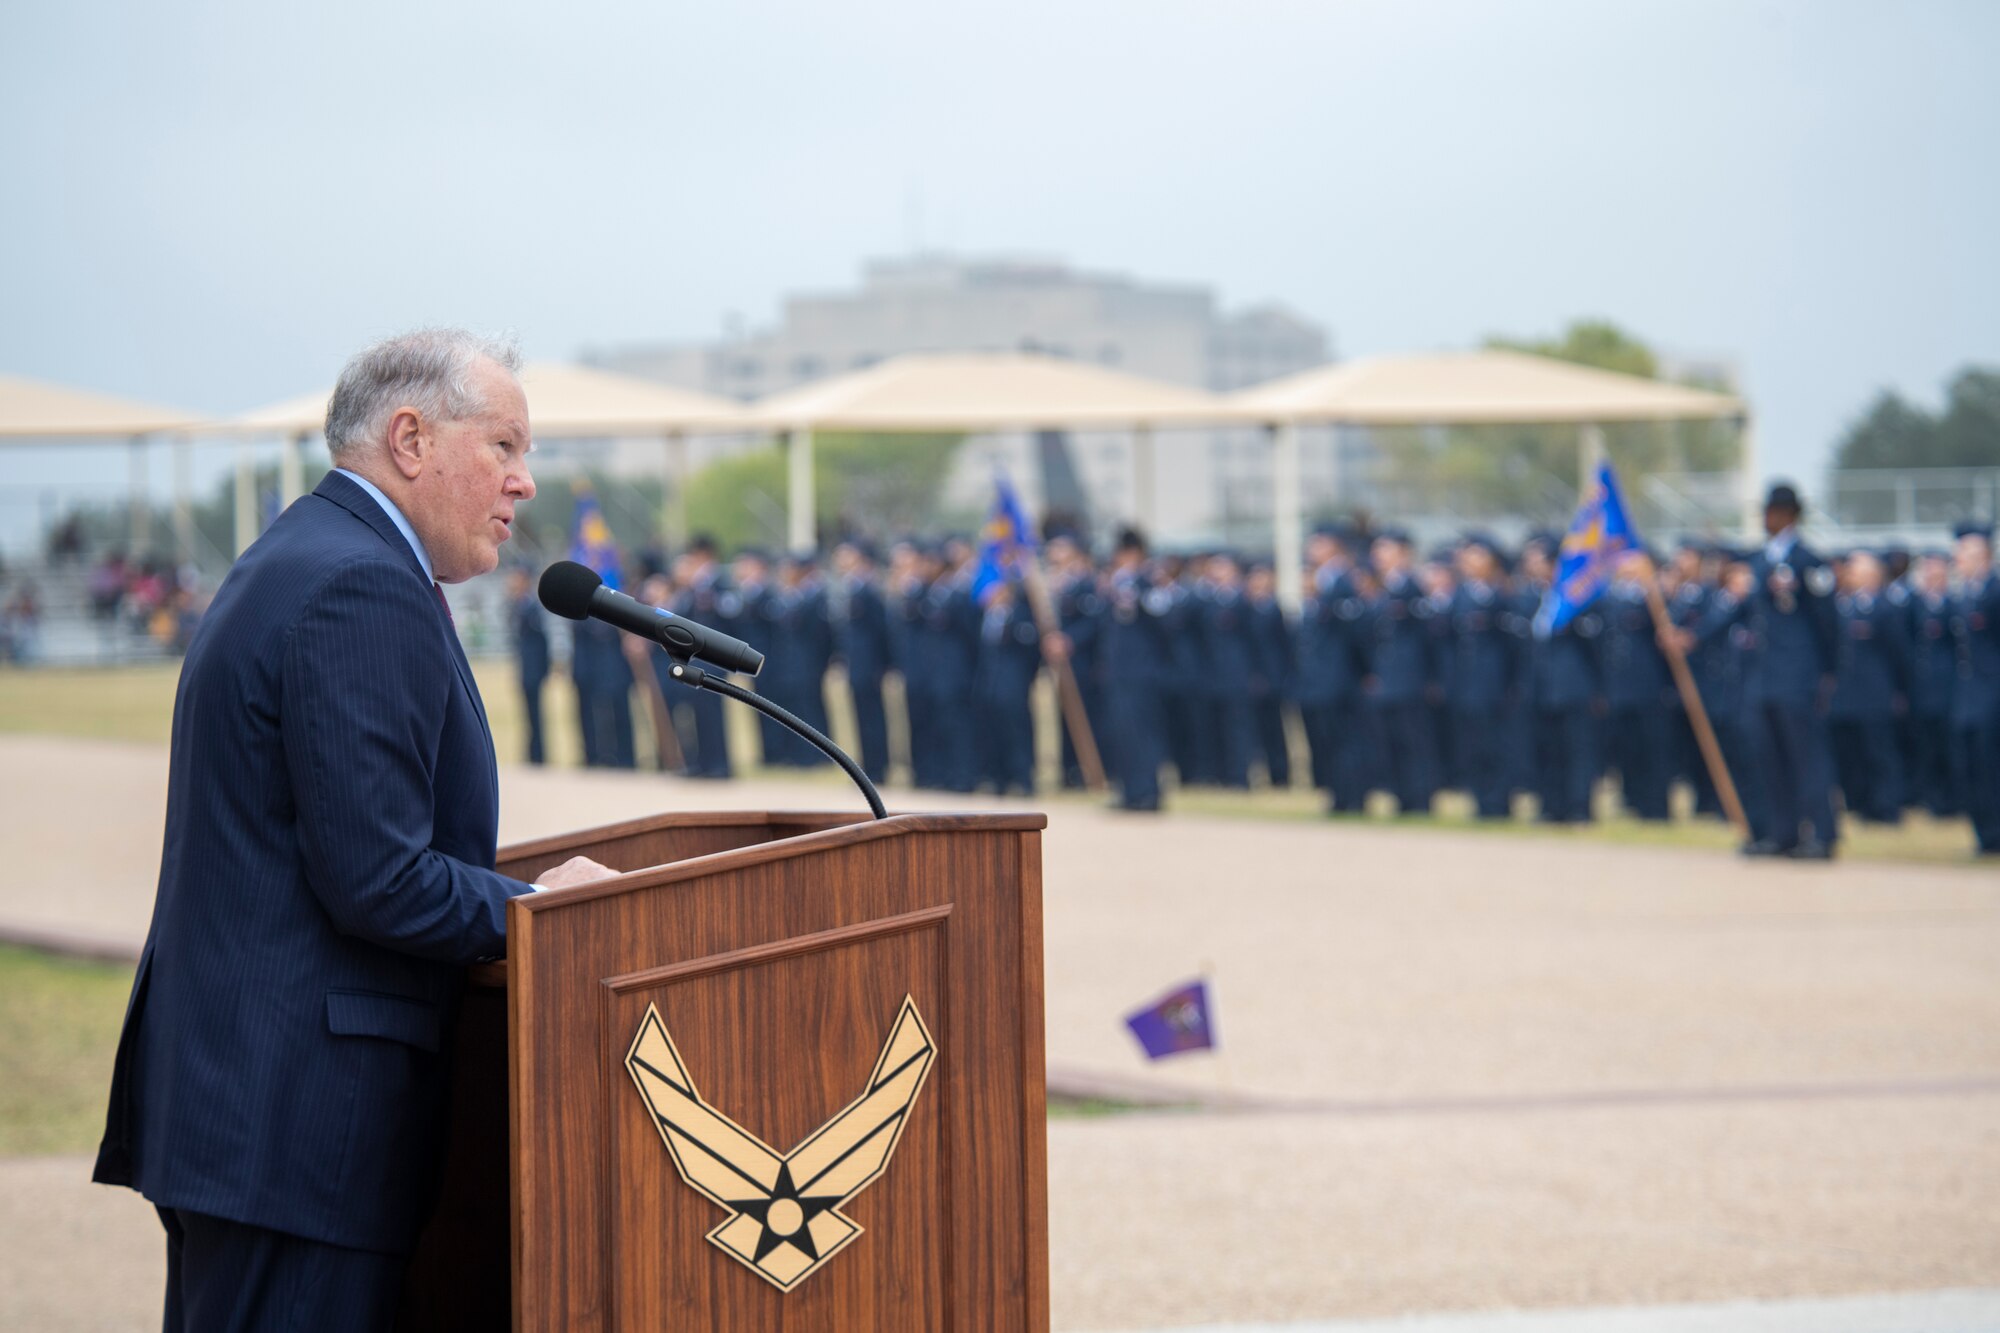 Secretary of the Air Force Frank Kendall reads at a podium to a crowd of Airmen.